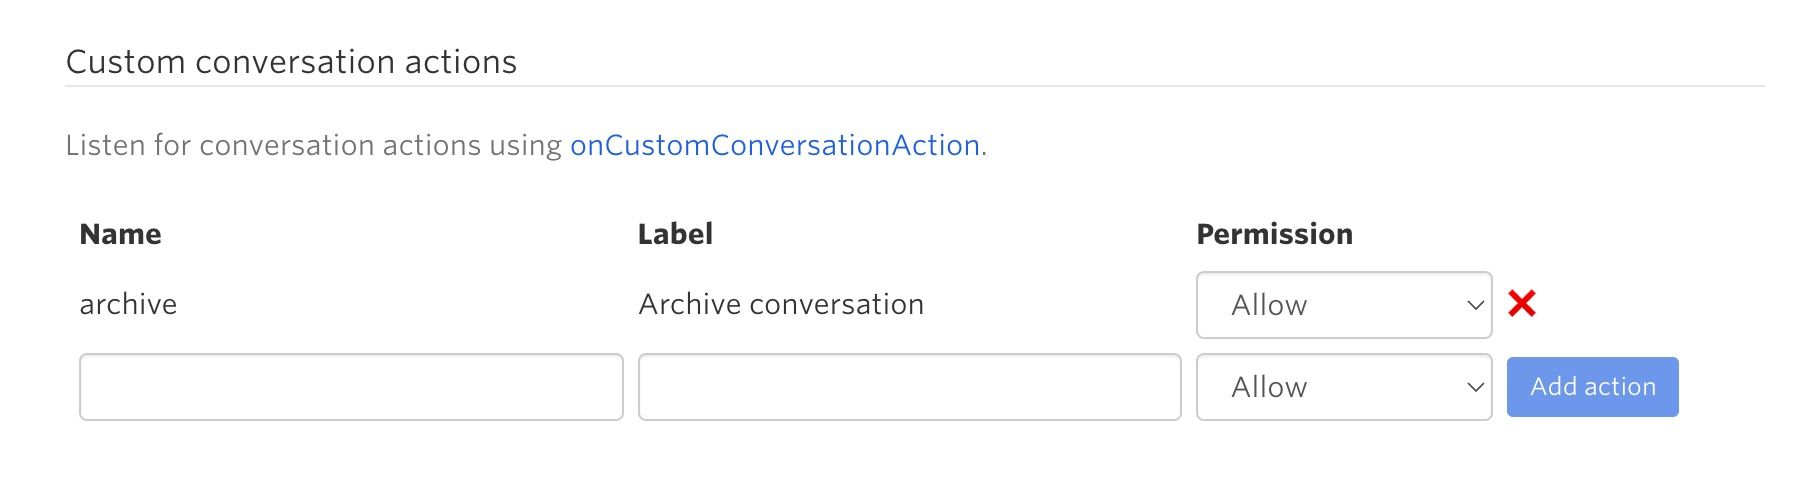 The conversation action options in the TalkJS dashboard